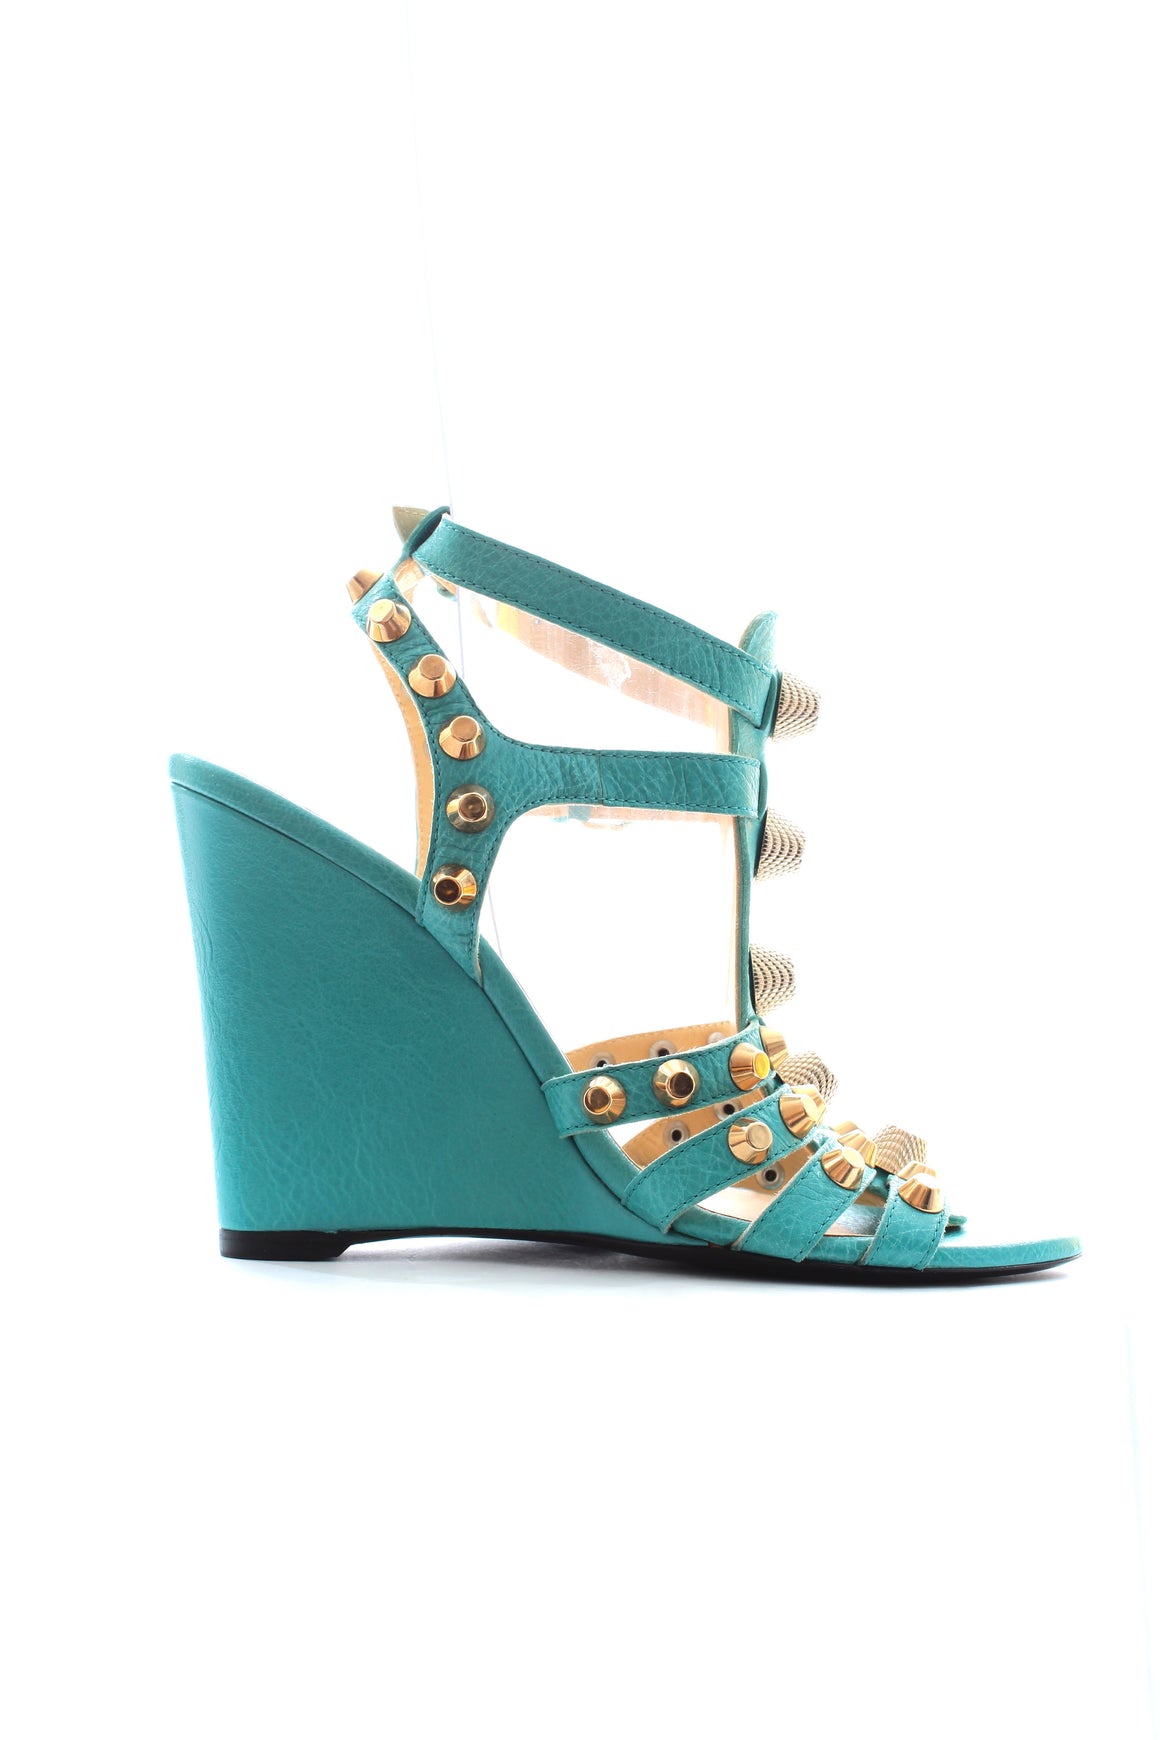 Balenciaga Studded Textured Leather Wedge Sandals